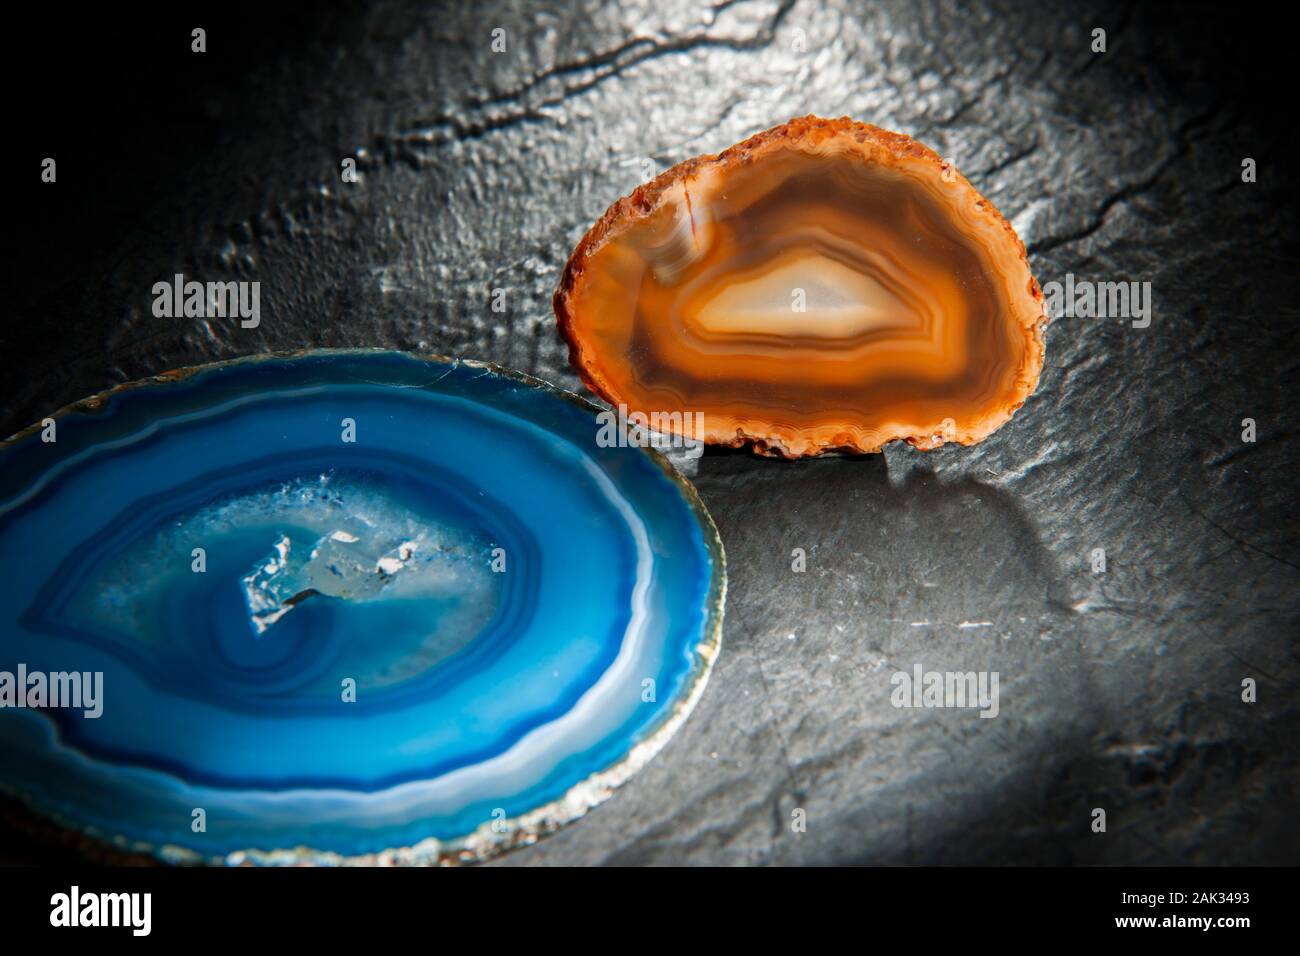 Studio shot of a thin polished disc of a round agate with blue circular banded grain and middle druse (hole) surrounded by crystalline structures. Stock Photo